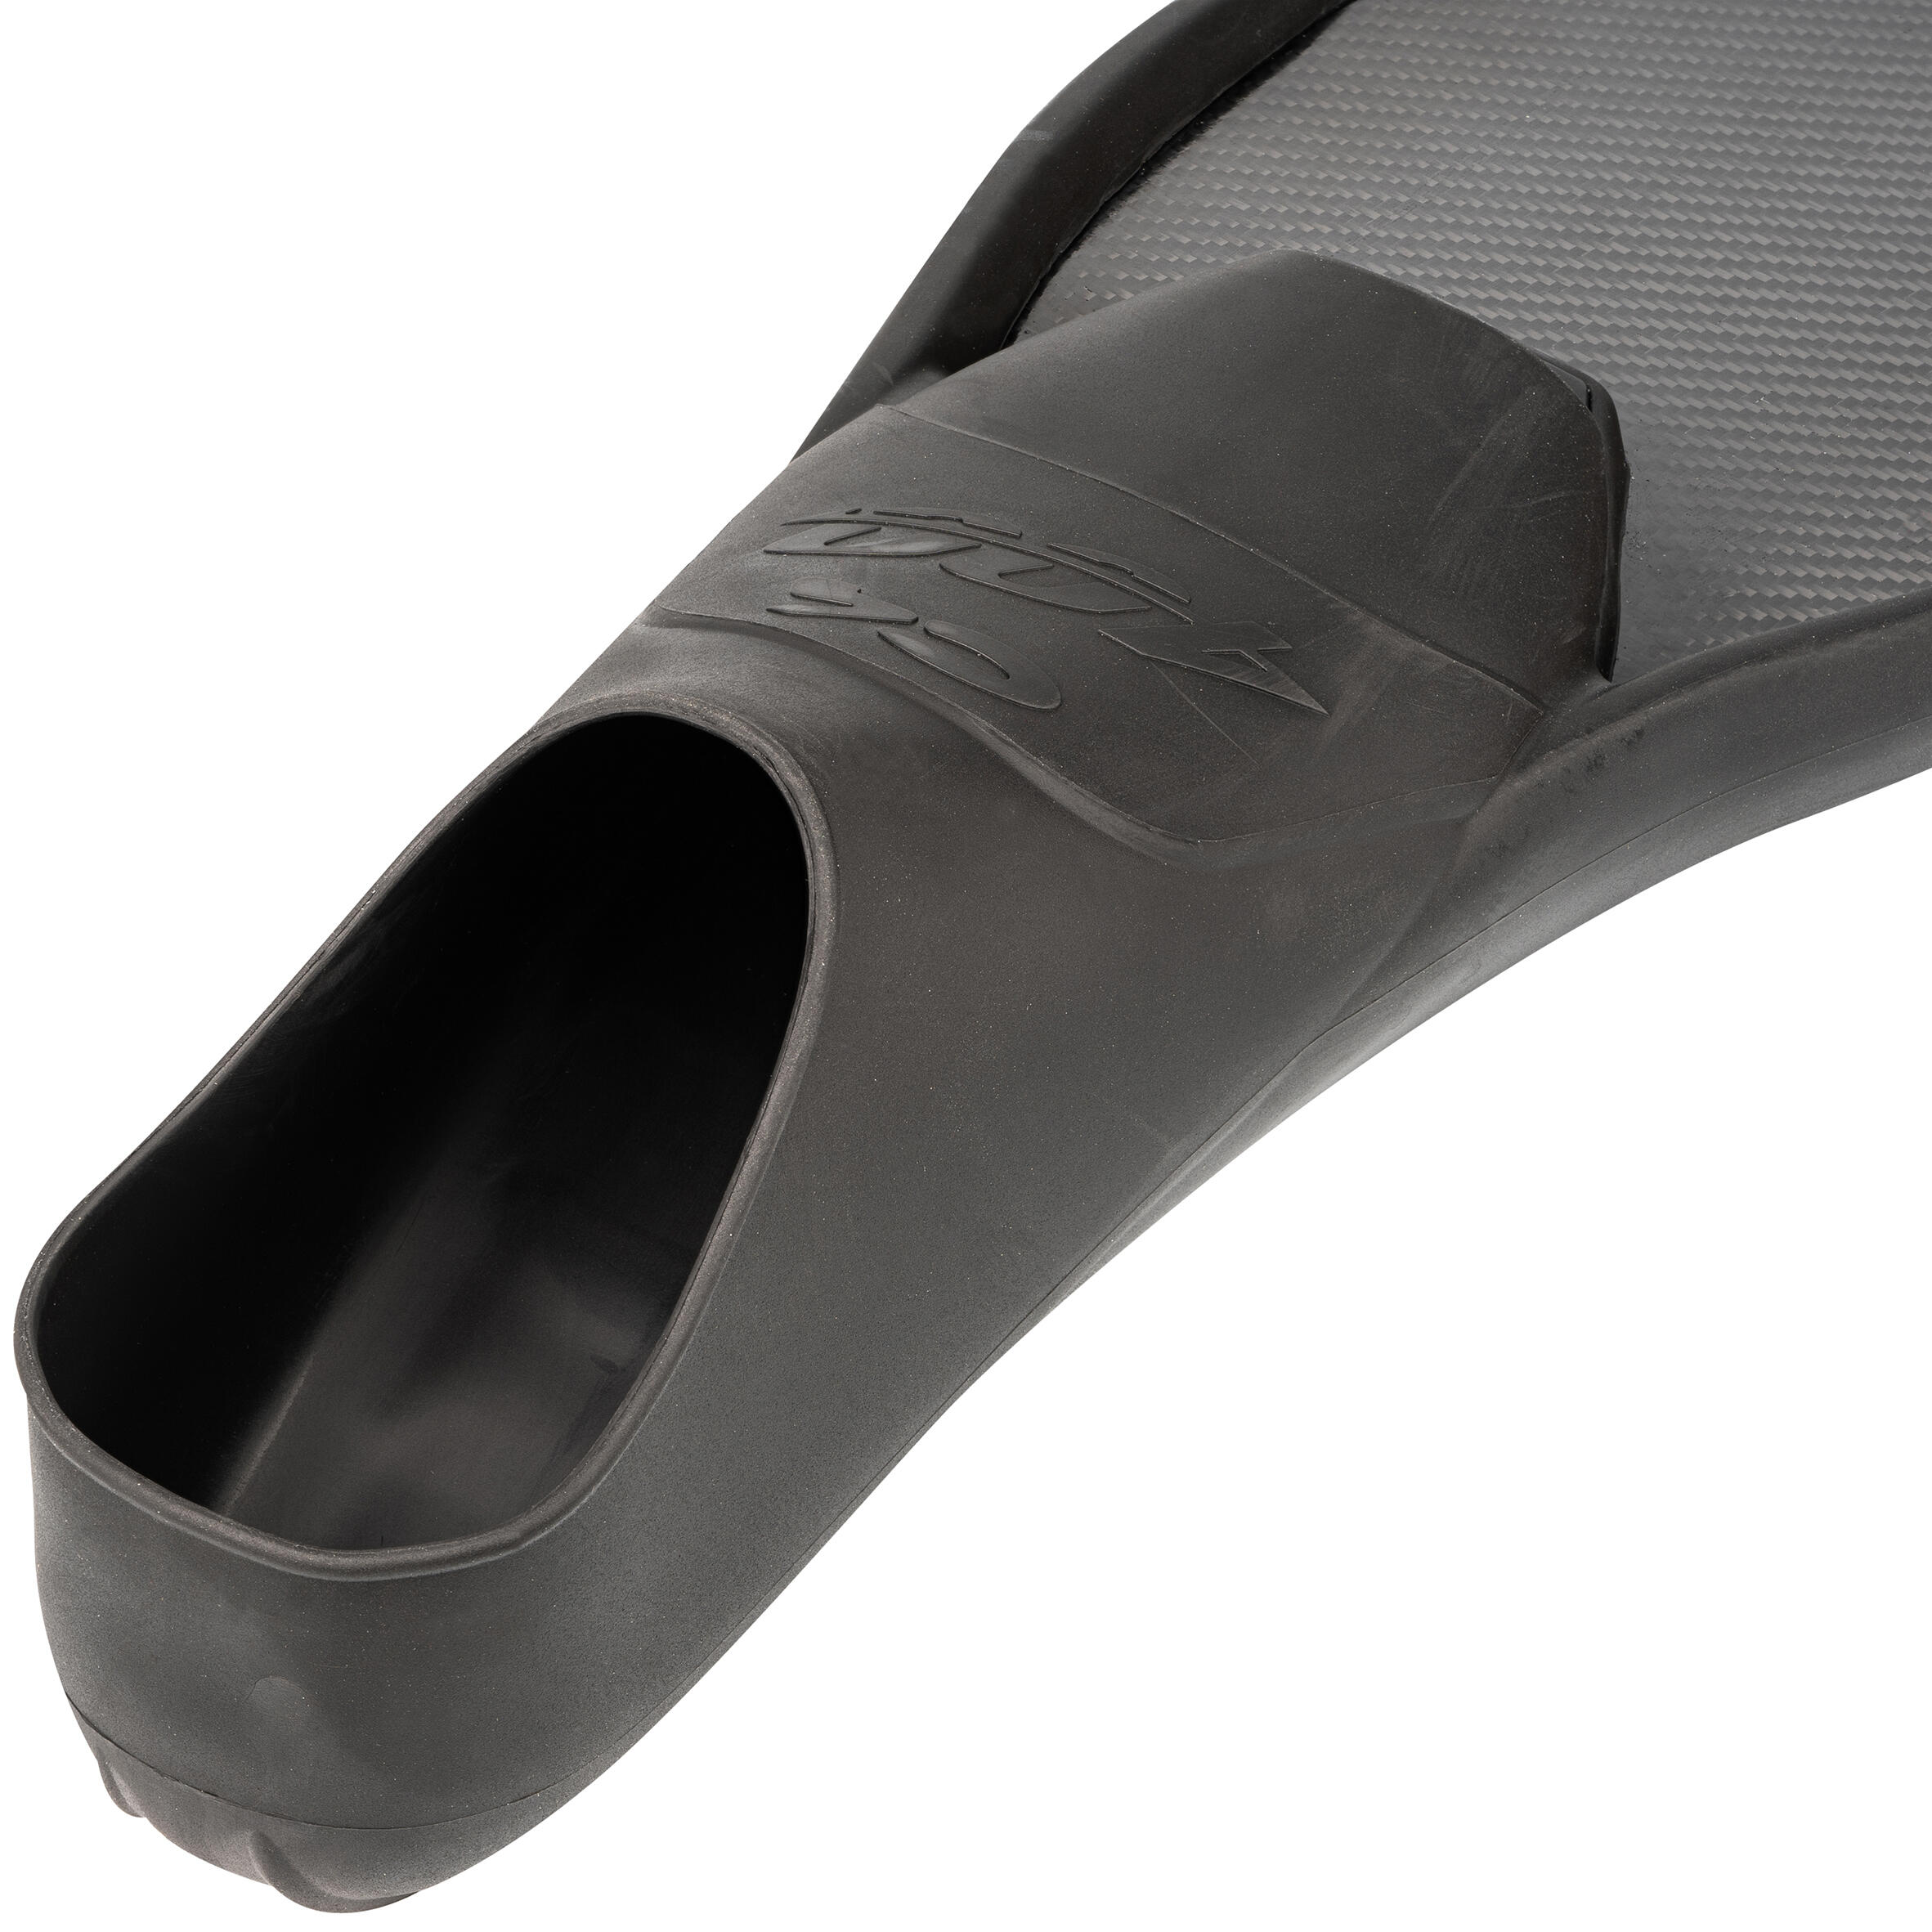 FREEDIVING AND SPEARFISHING FINS C4 CARBON MINIMAL 100% CARBON 5/6